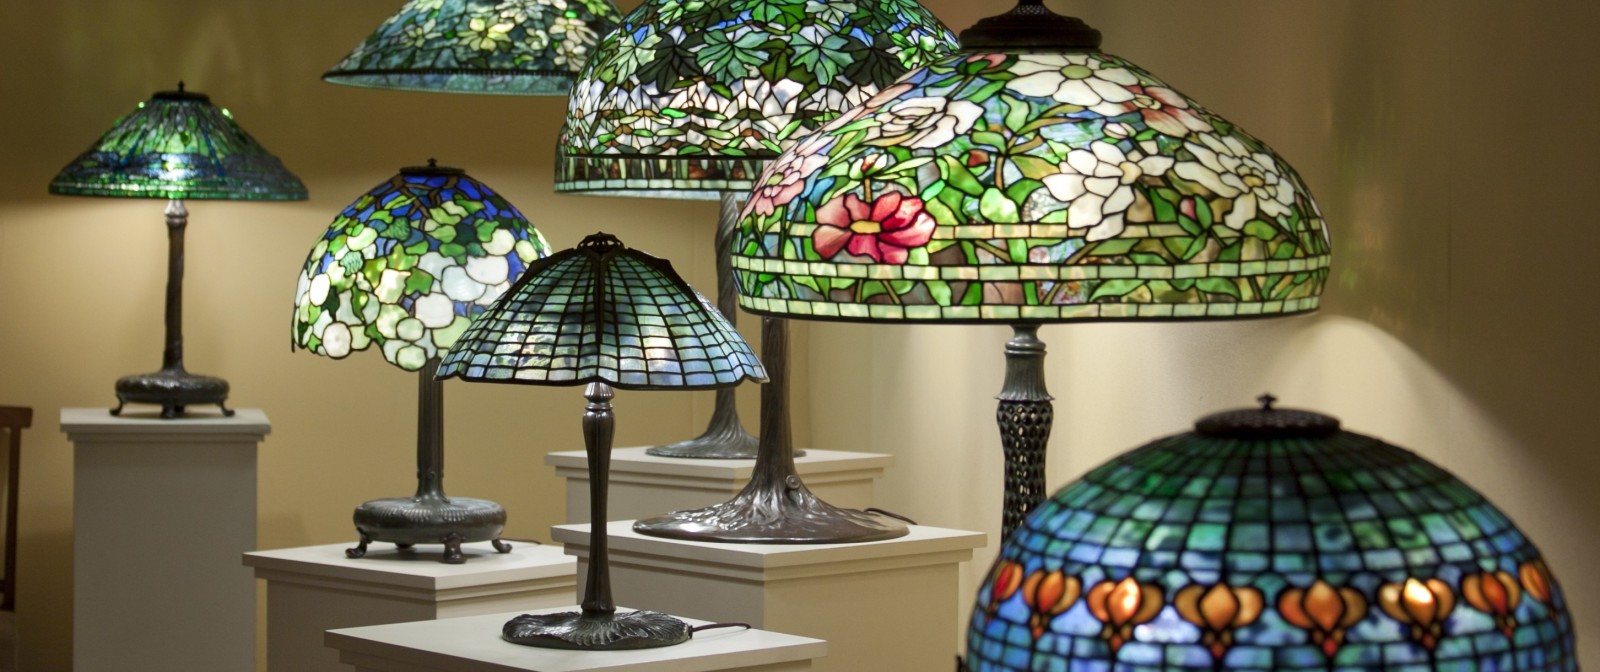 A photograph showing a grouping of Tiffany Lamps in a Lillian Nassau LLC exhibition, each with a leaded glass shade in vibrant colors depicting various flowers and geometric patterns.